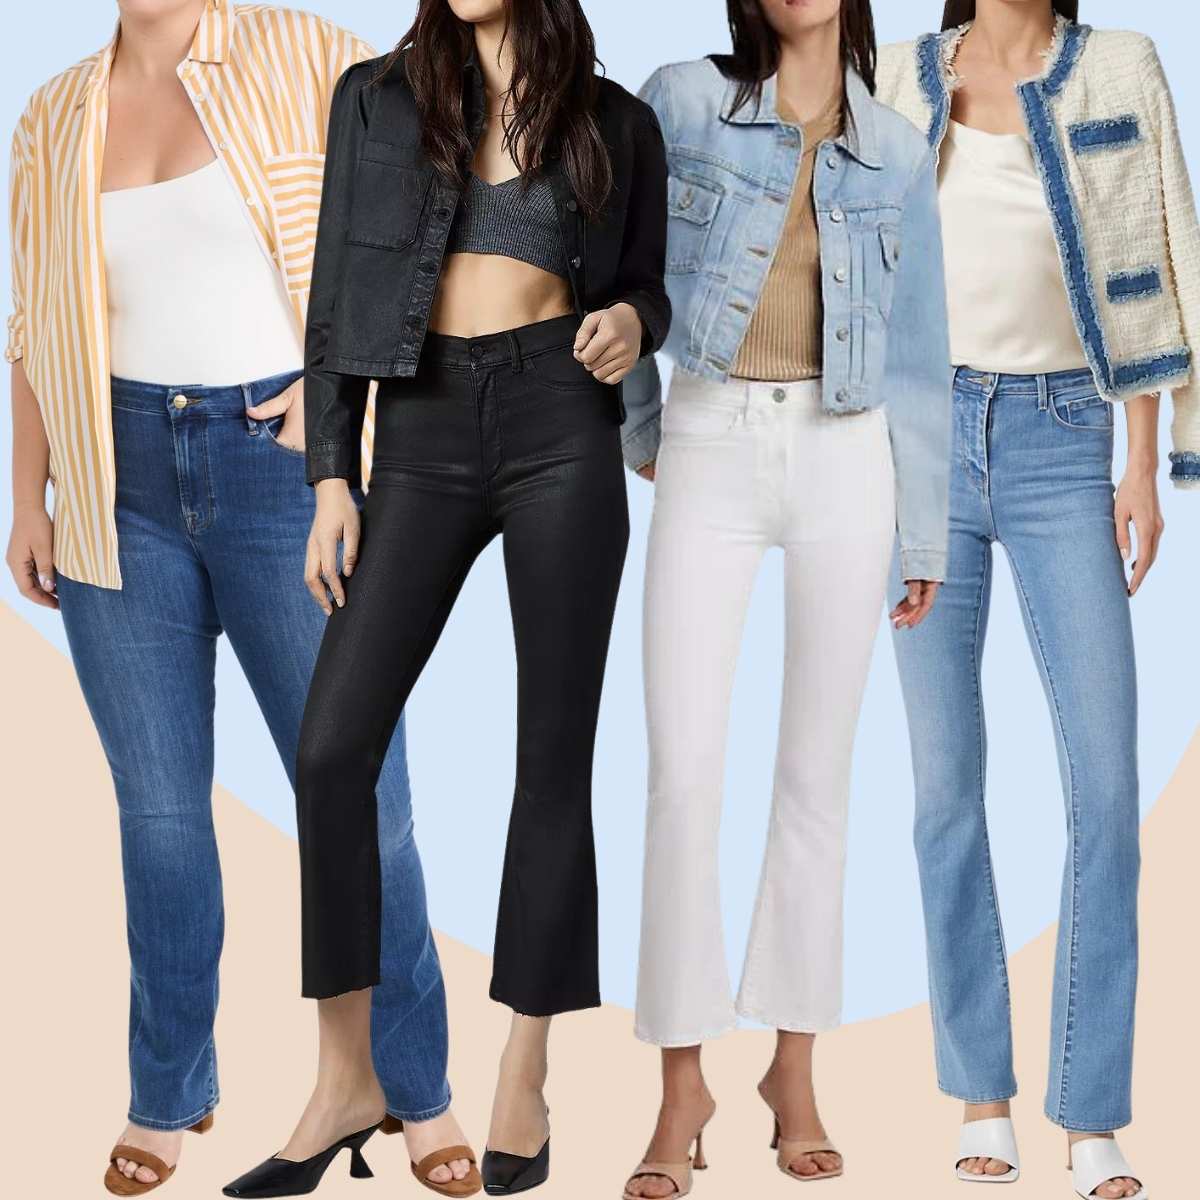 Collage of 4 women wearing heeled mules with bootcut jeans outfits.